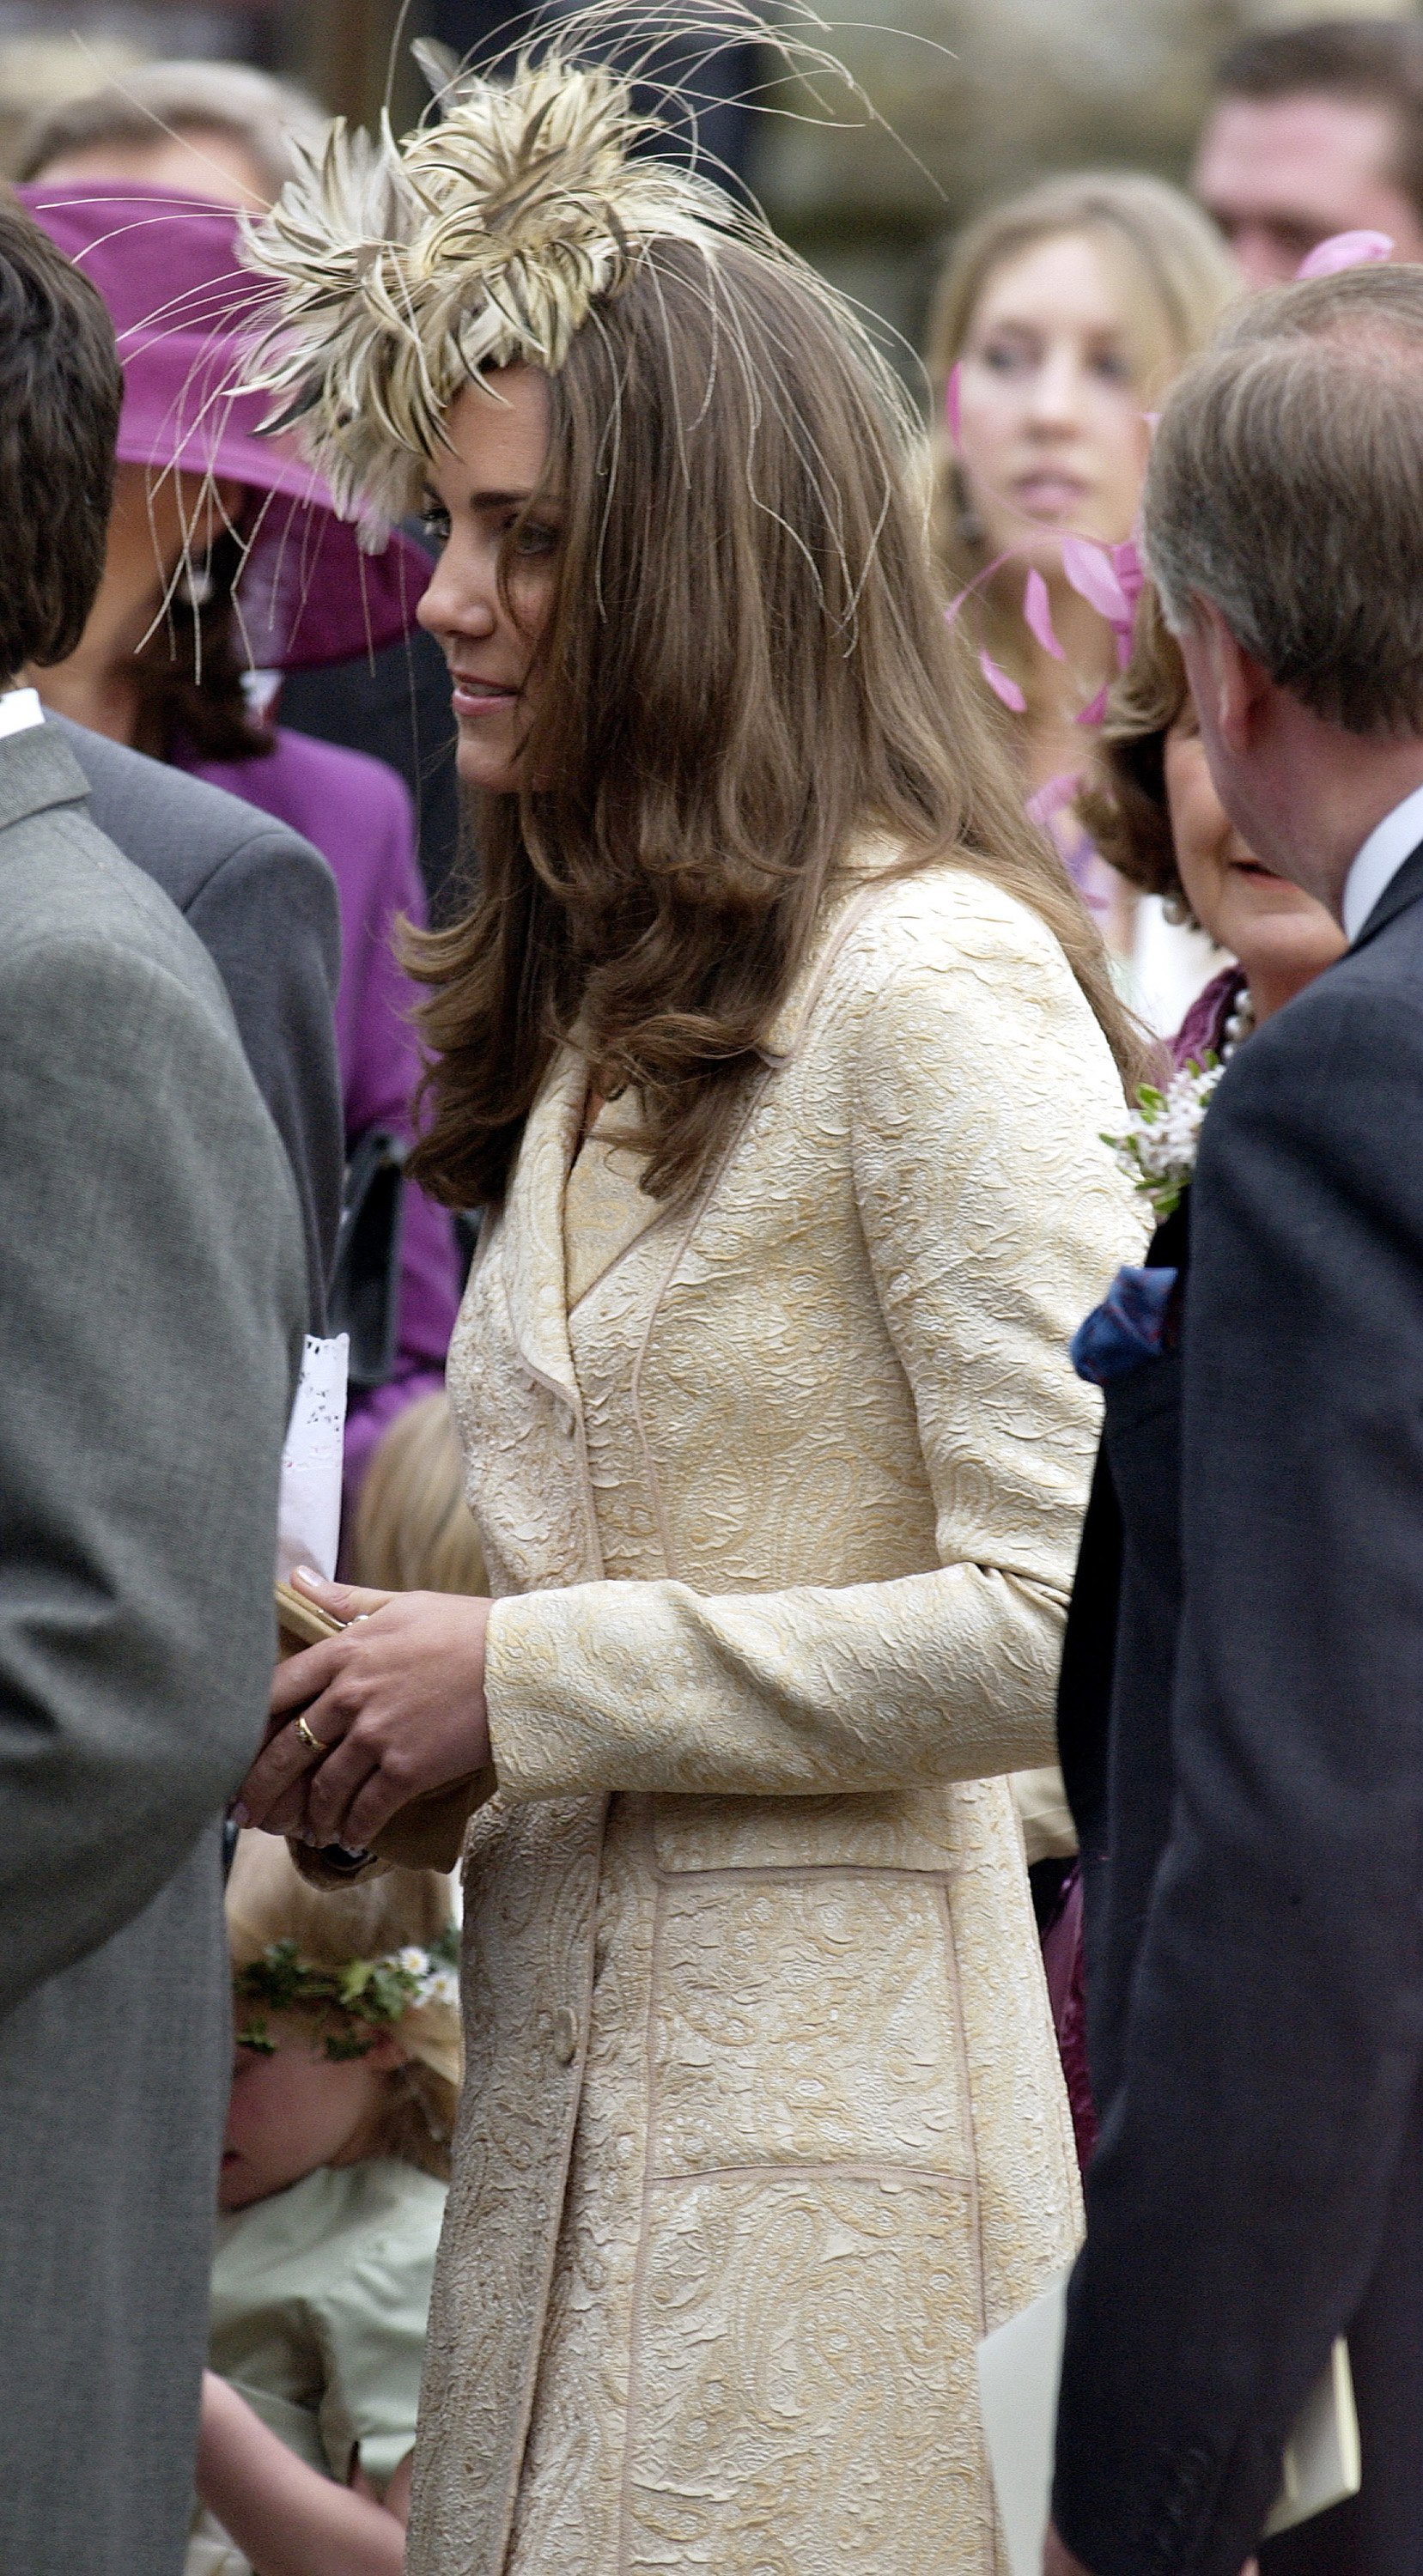 Kate Middleton departs the wedding of Laura Parker Bowles and Harry Lopes at St Cyriac's Church, Lacock on May 6, 2006 in Wiltshire, England.  |  Source: Getty Images